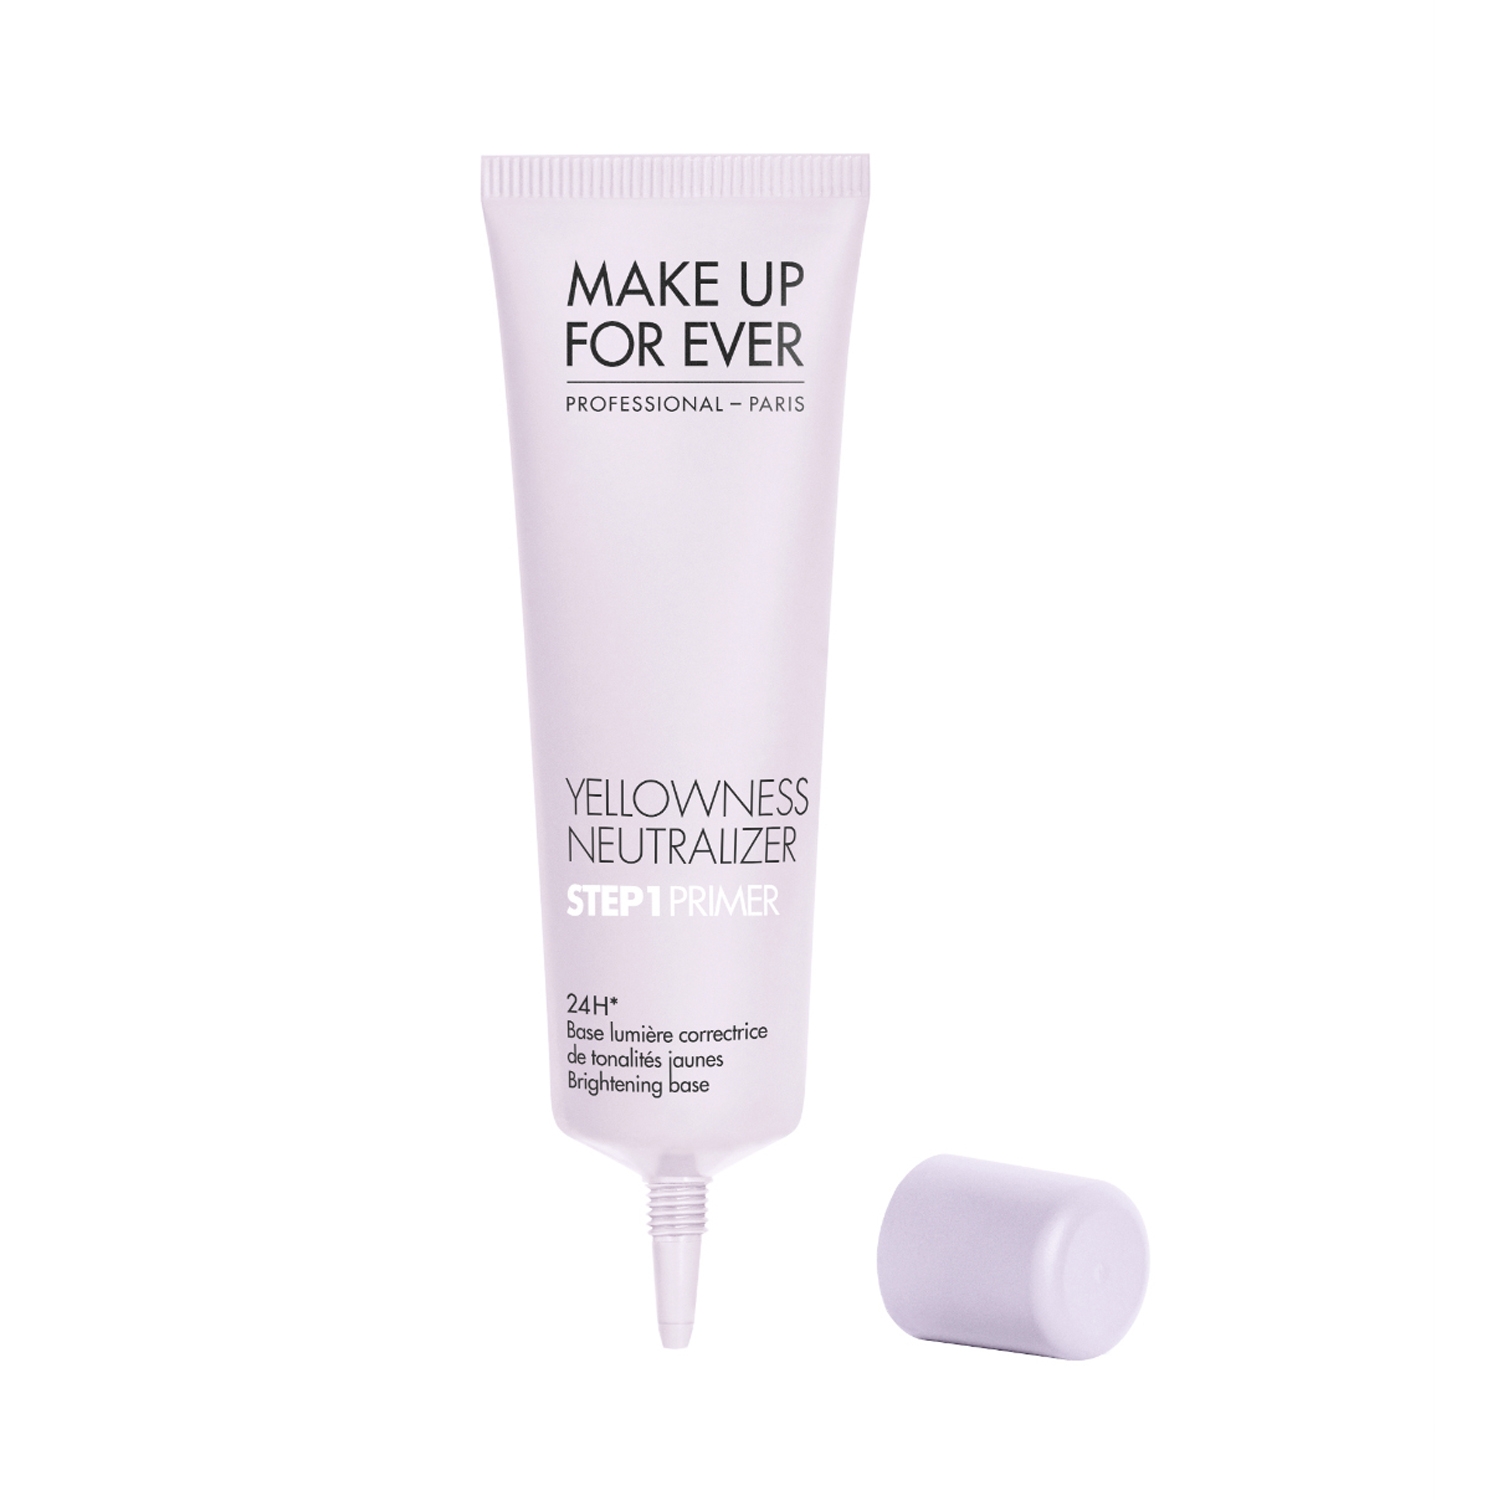 Make Up For Ever | Make Up for Ever Yellowness Neutralizer Step 1 Primer-24h (30ml)